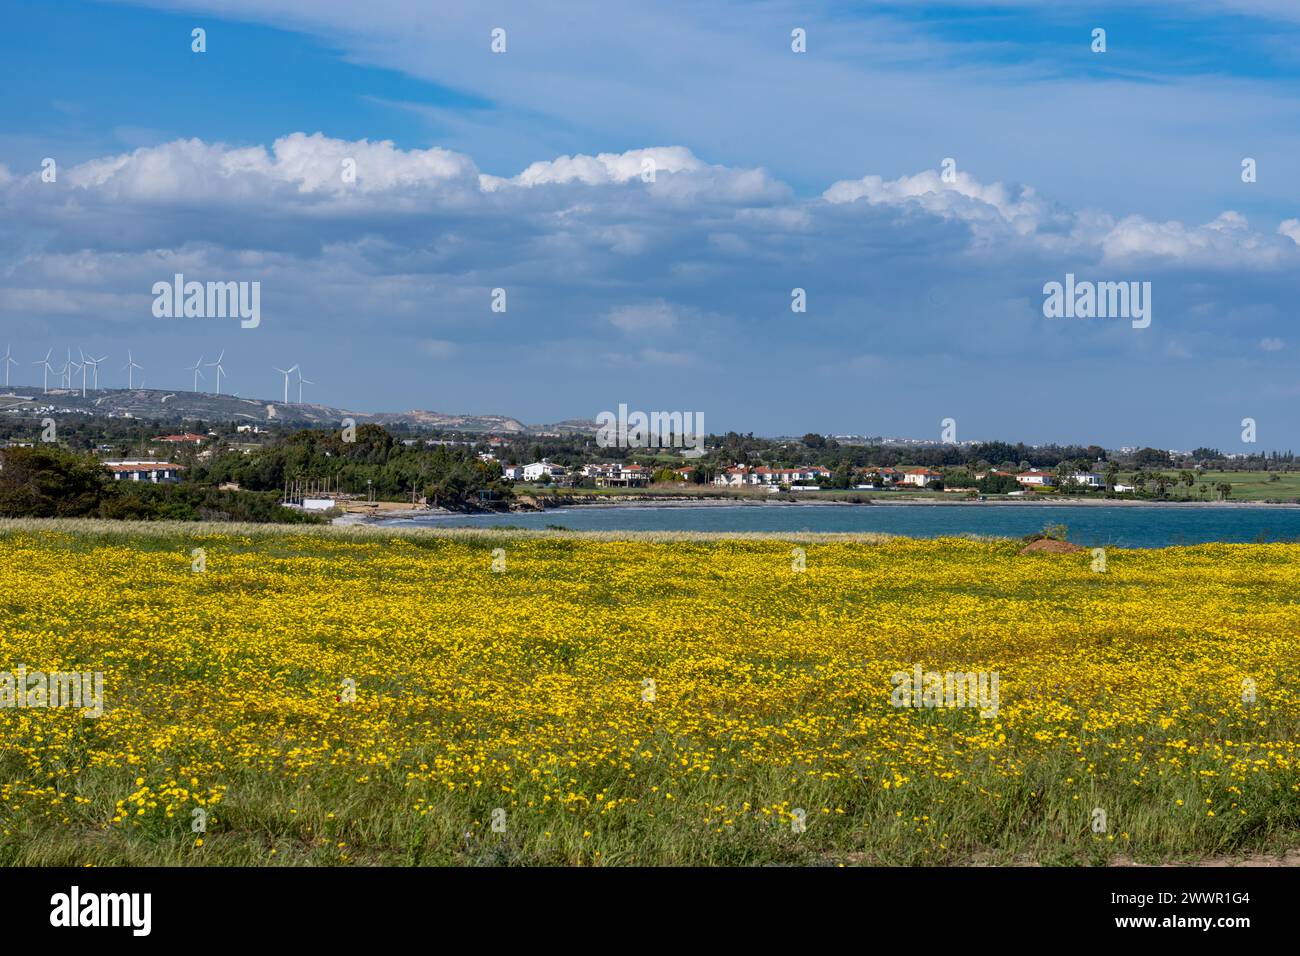 Cyprus Field of Crown daisies The Mediterranean Sea in the background Stock Photo